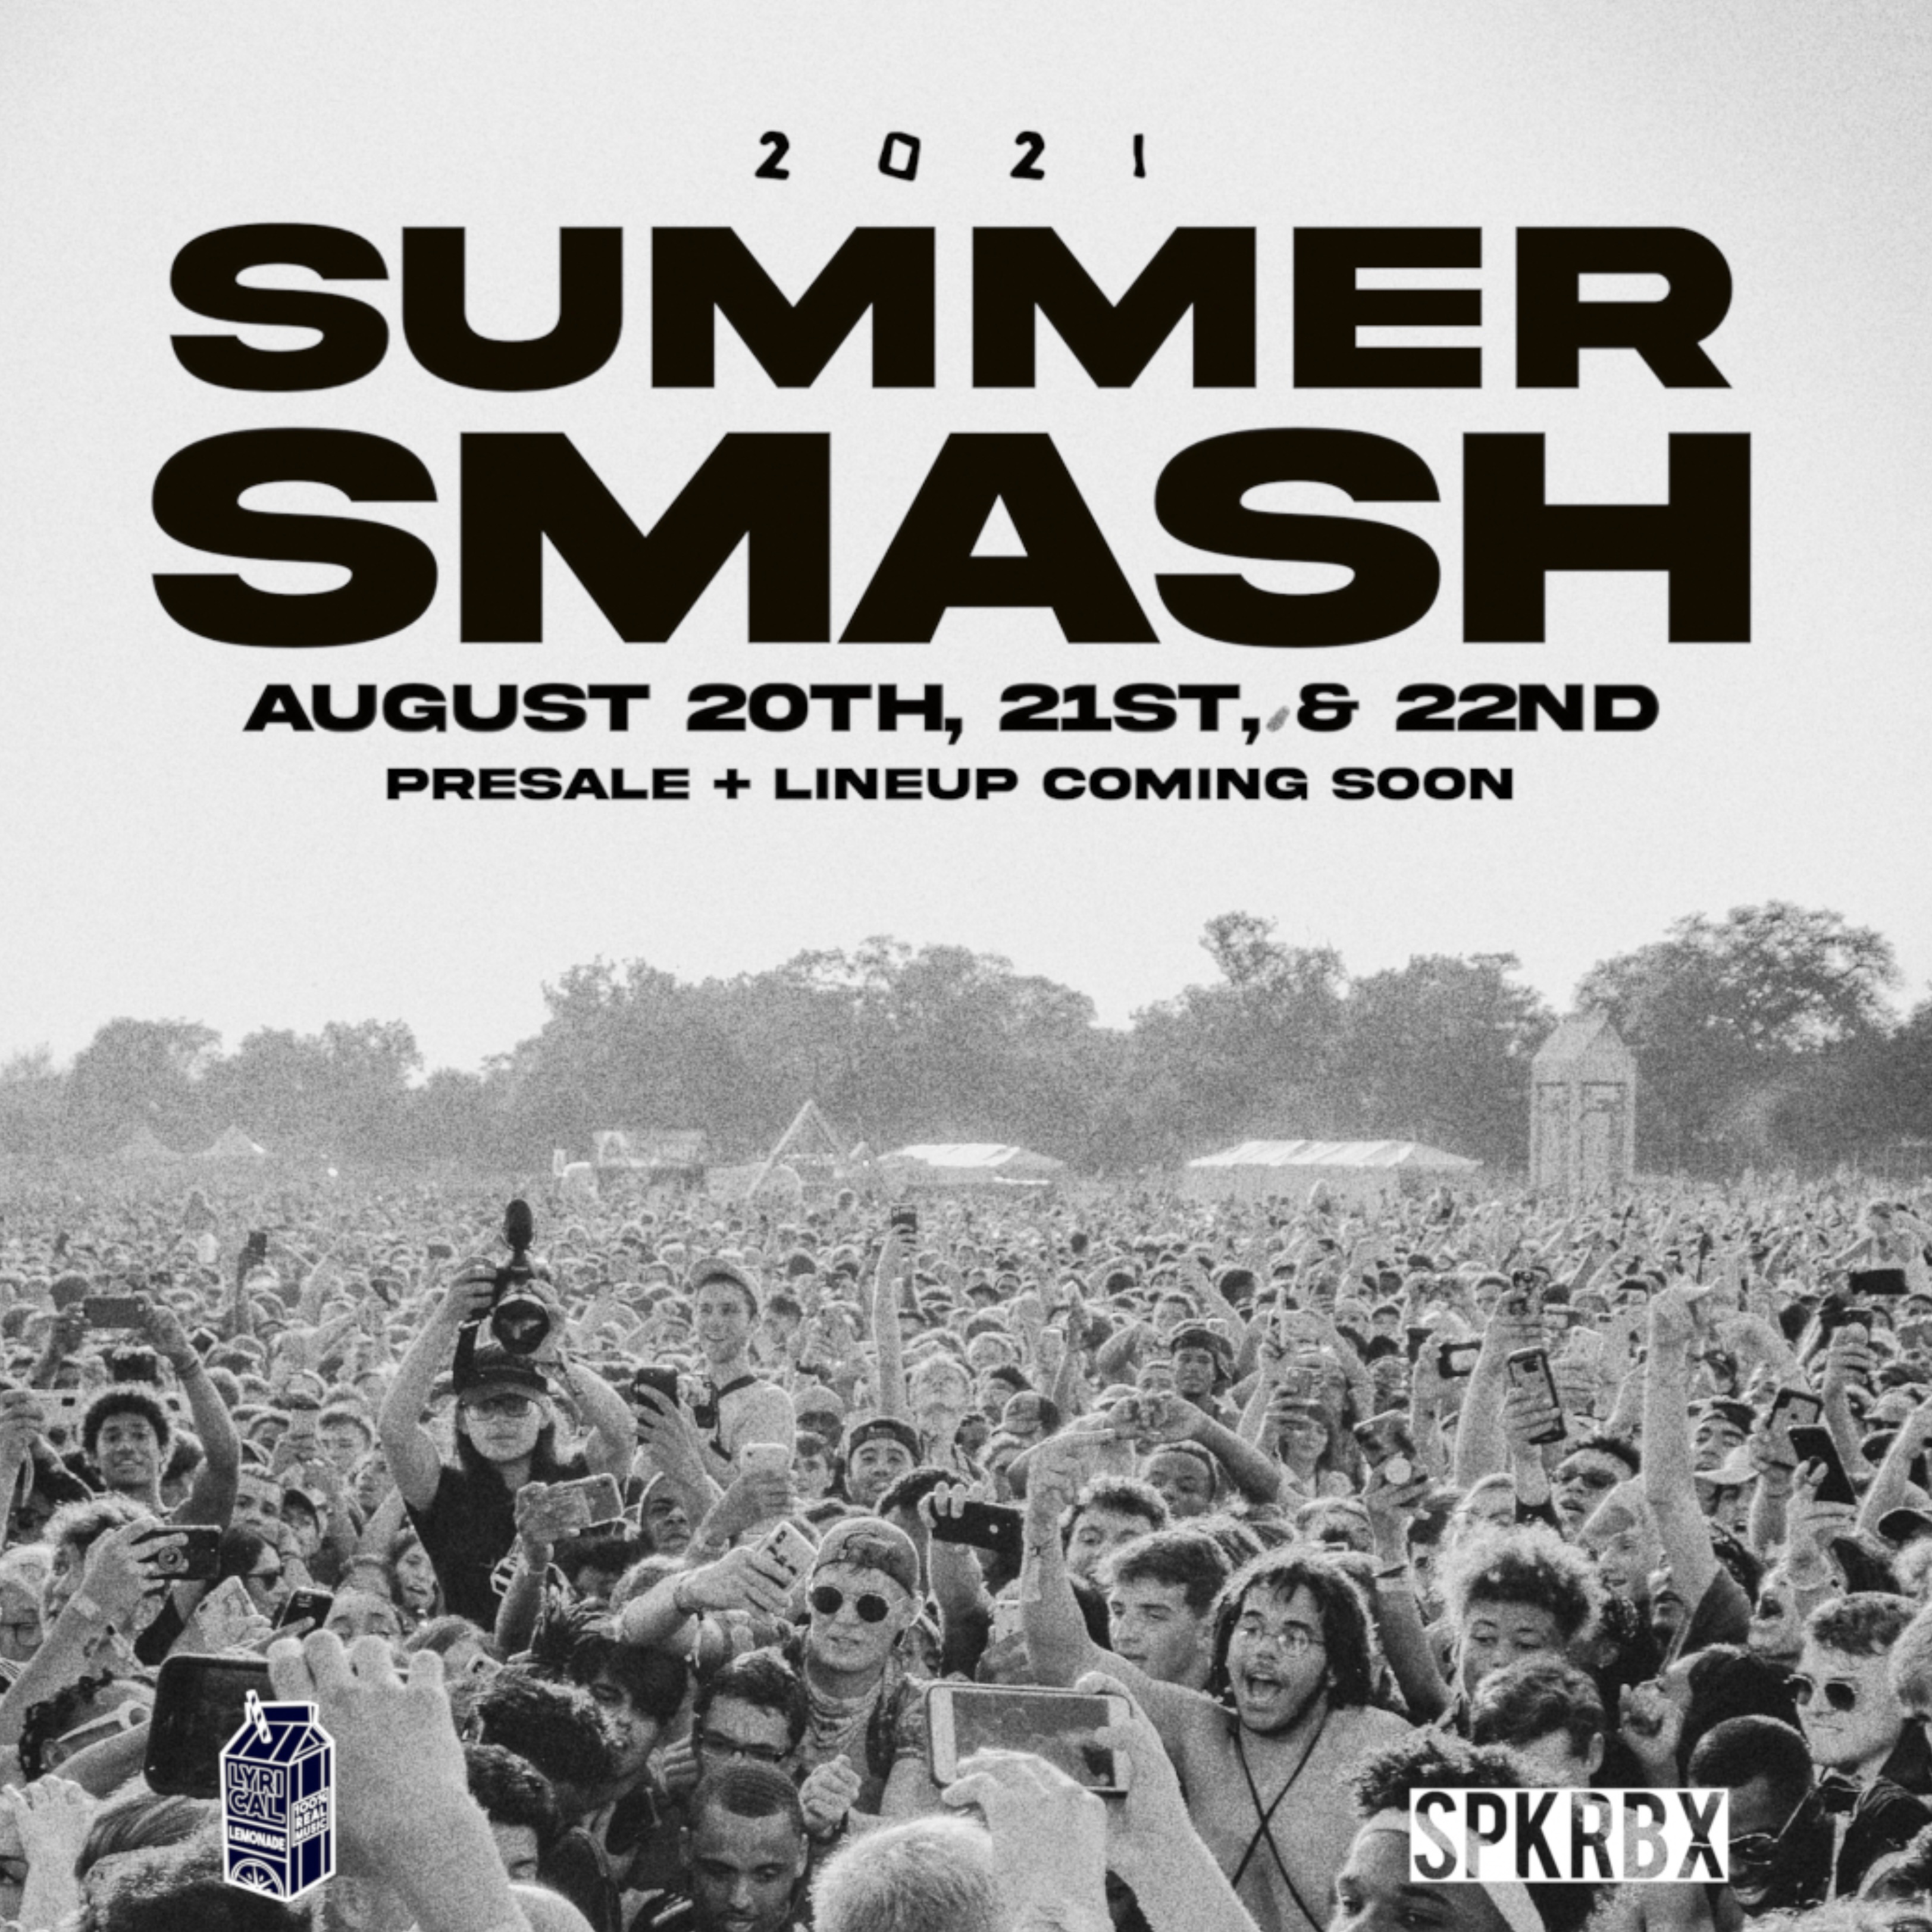 Buy Tickets to The Summer Smash Festival 2021 in Chicago on Aug 20